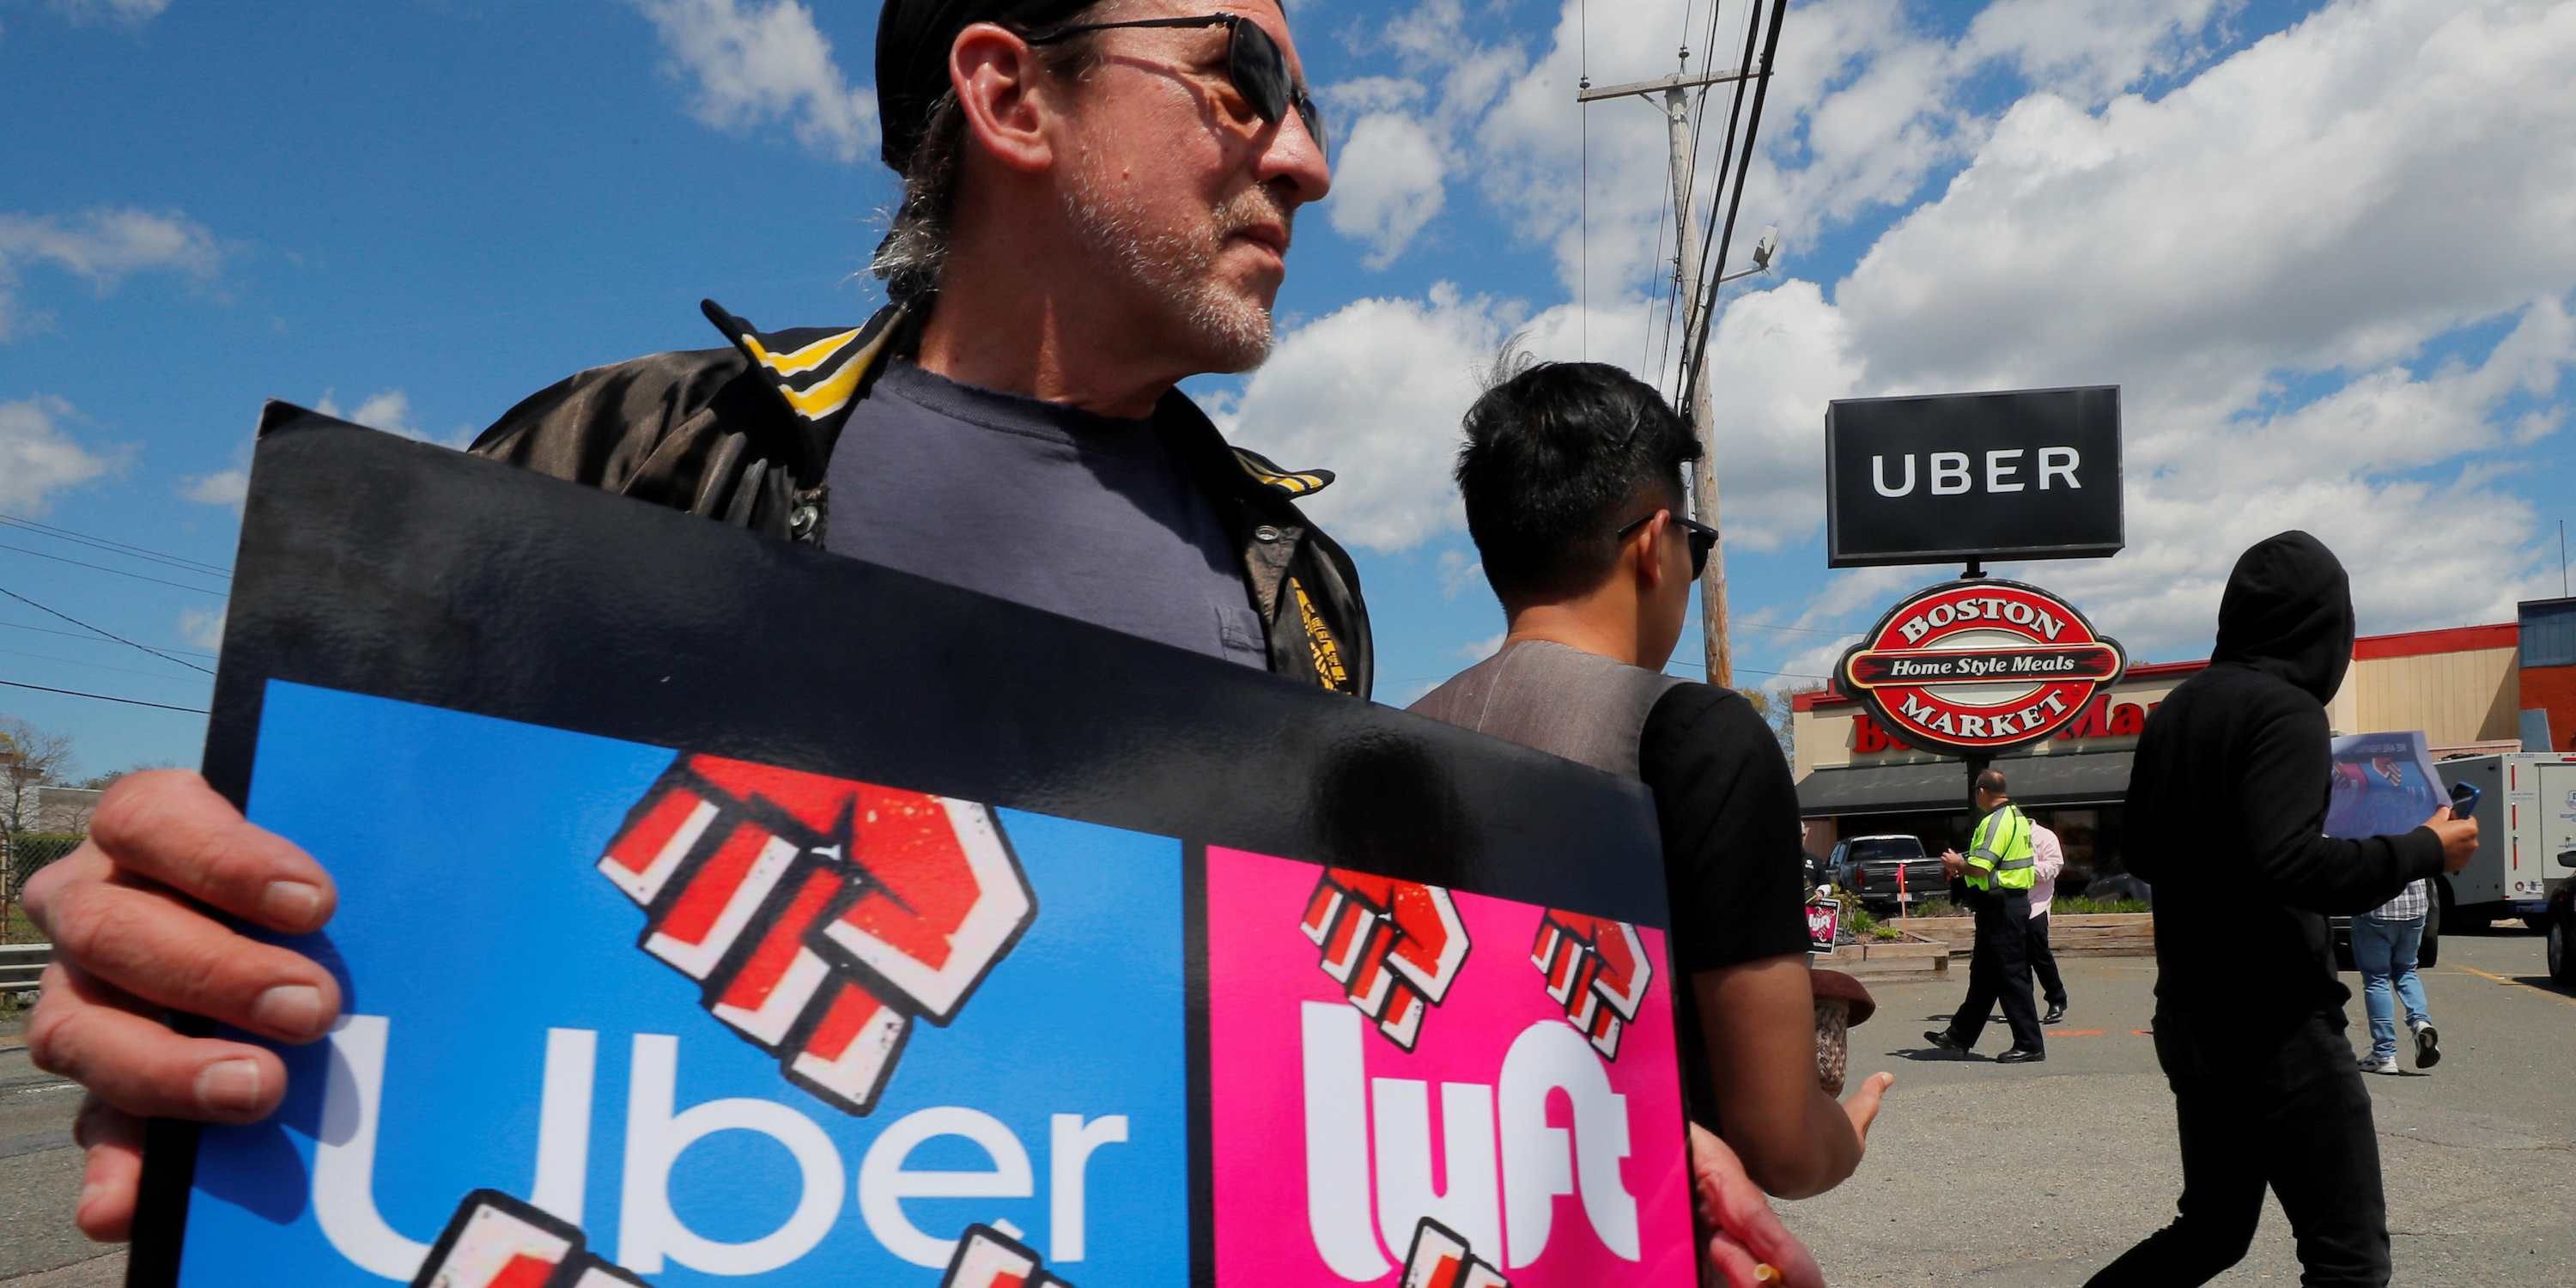 Uber promised to pay drivers who couldn’t work because of the coronavirus. But drivers say Uber has been closing their accounts after they seek sick pay, and then ignoring or rejecting their claims. (UBER)